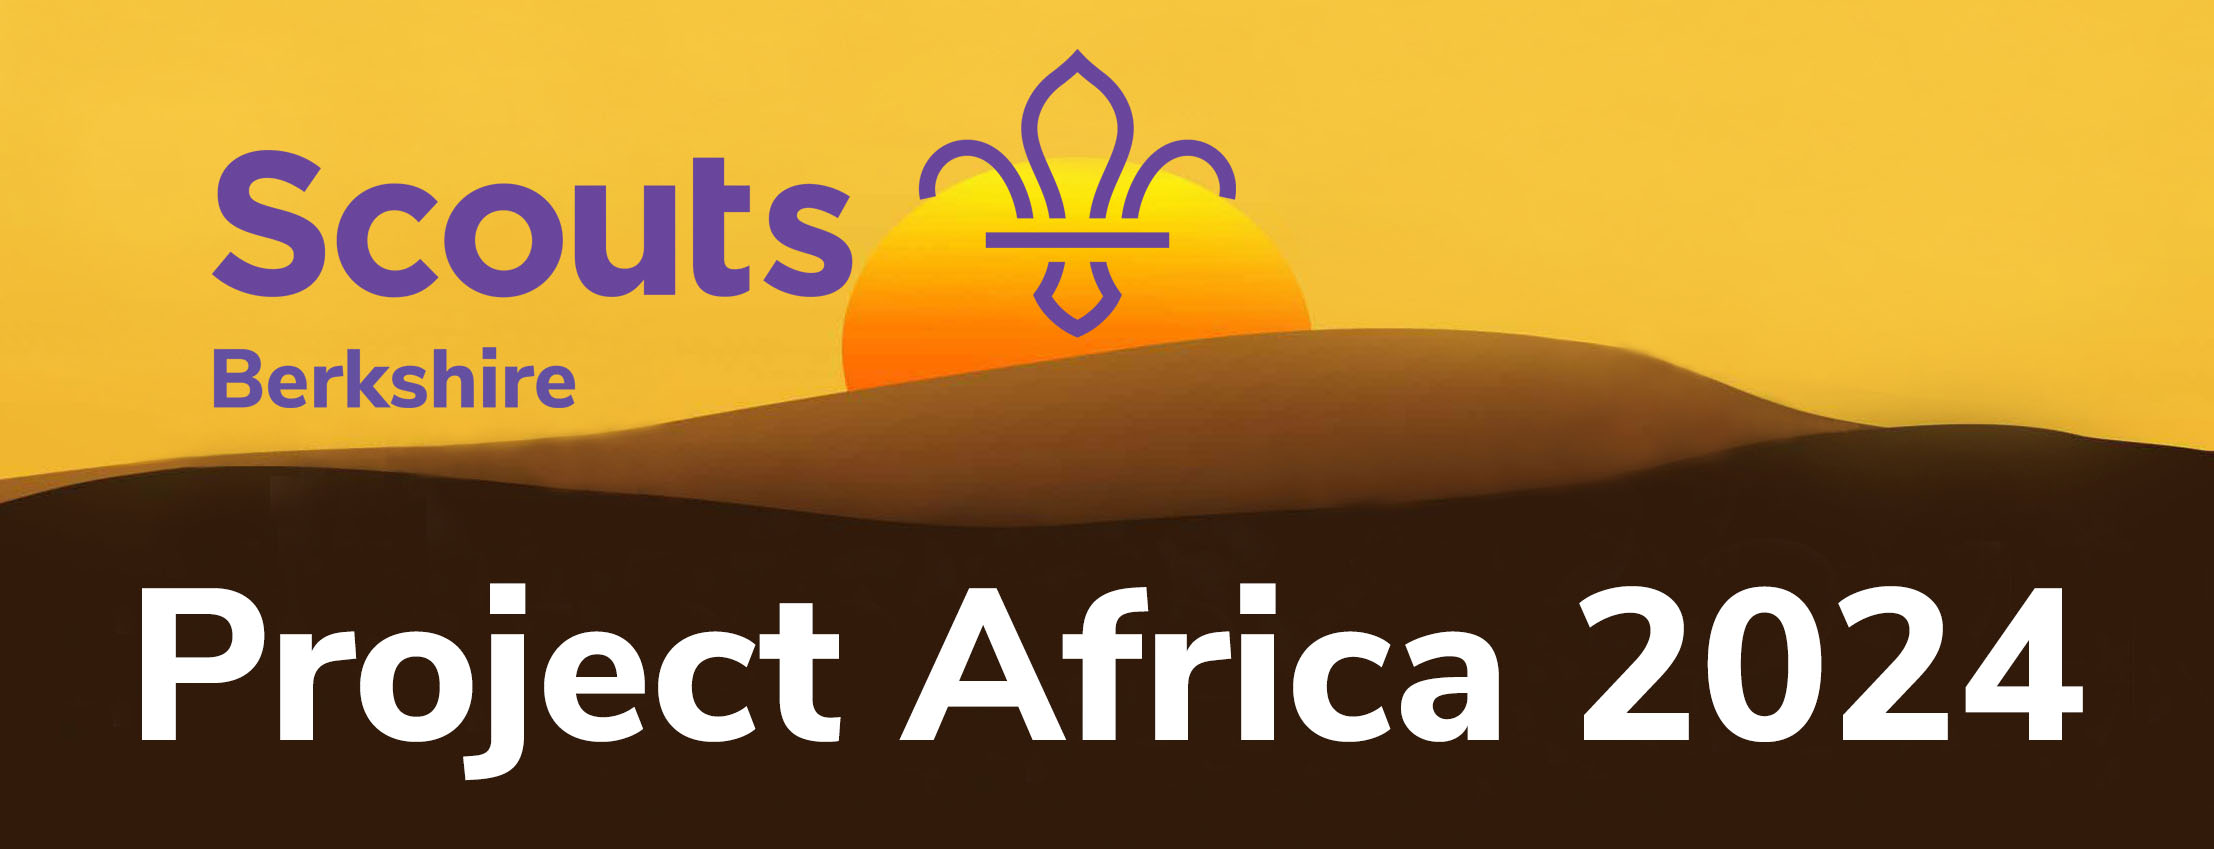 Project Africa 2024 Berkshire Scouts